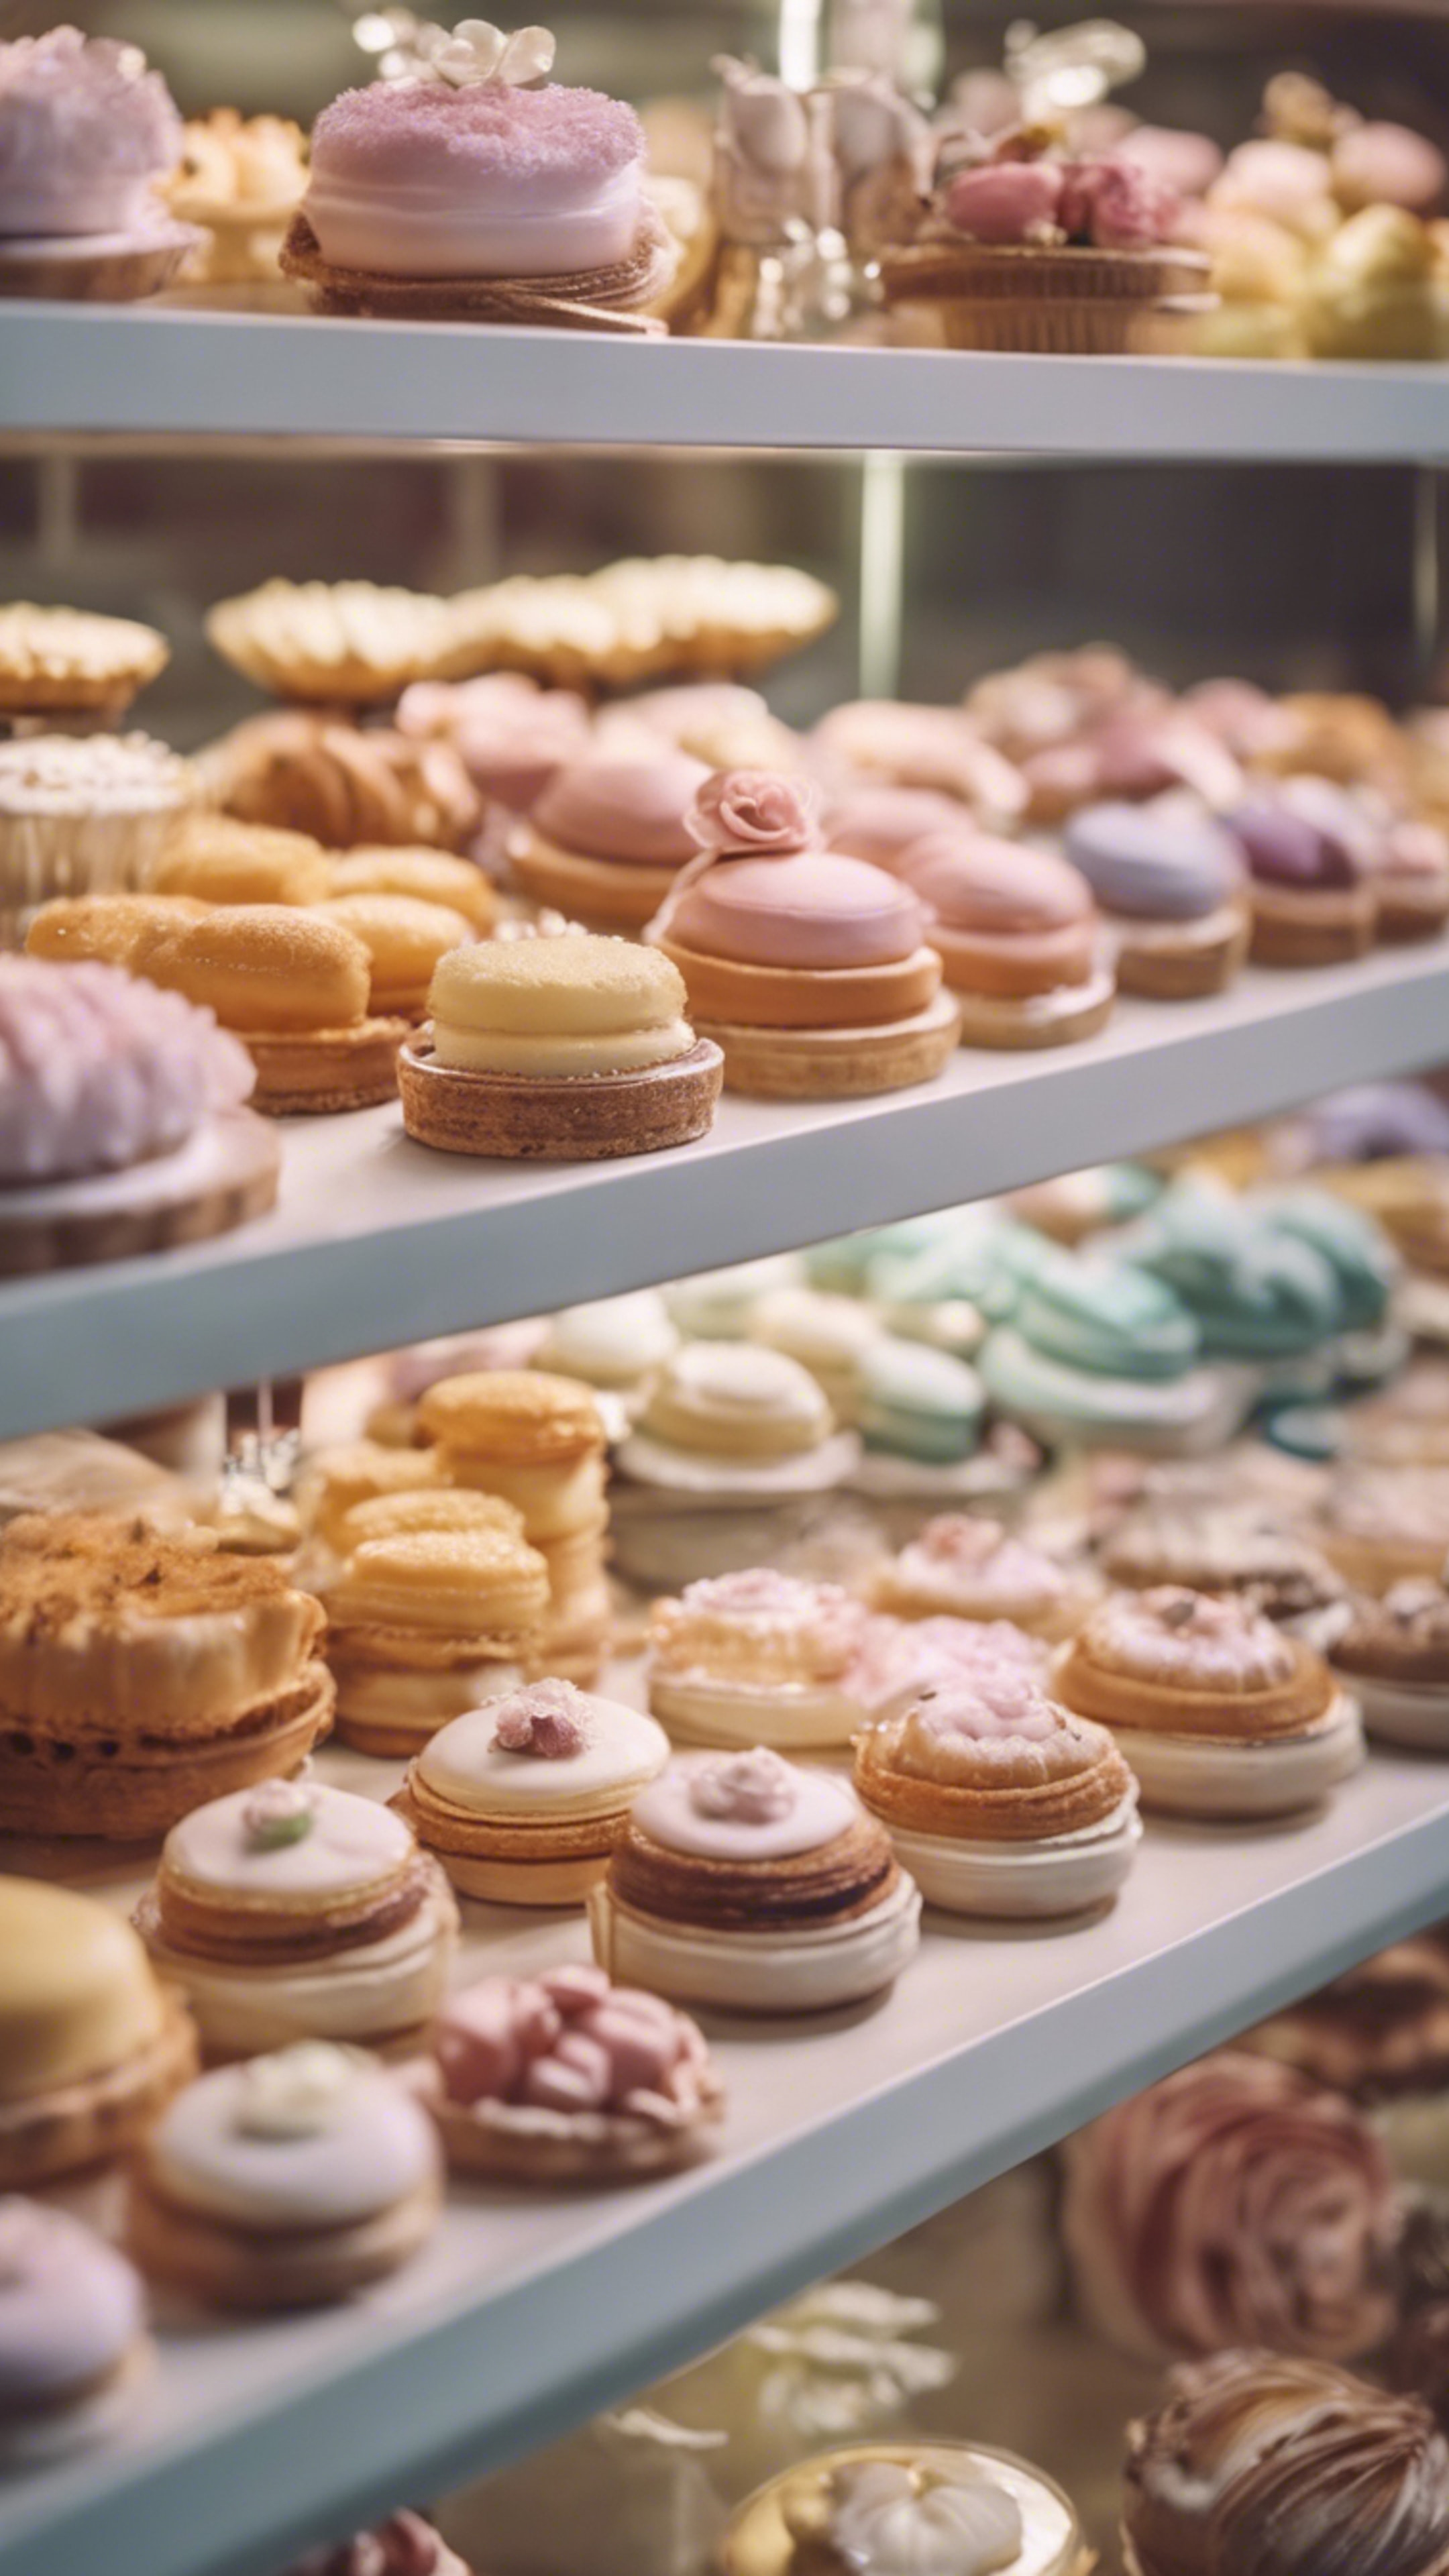 A classic French patisserie in pastel colors, filled with elegantly fashioned cakes and pastries. Wallpaper[85bb484f9d7f40c5ac29]